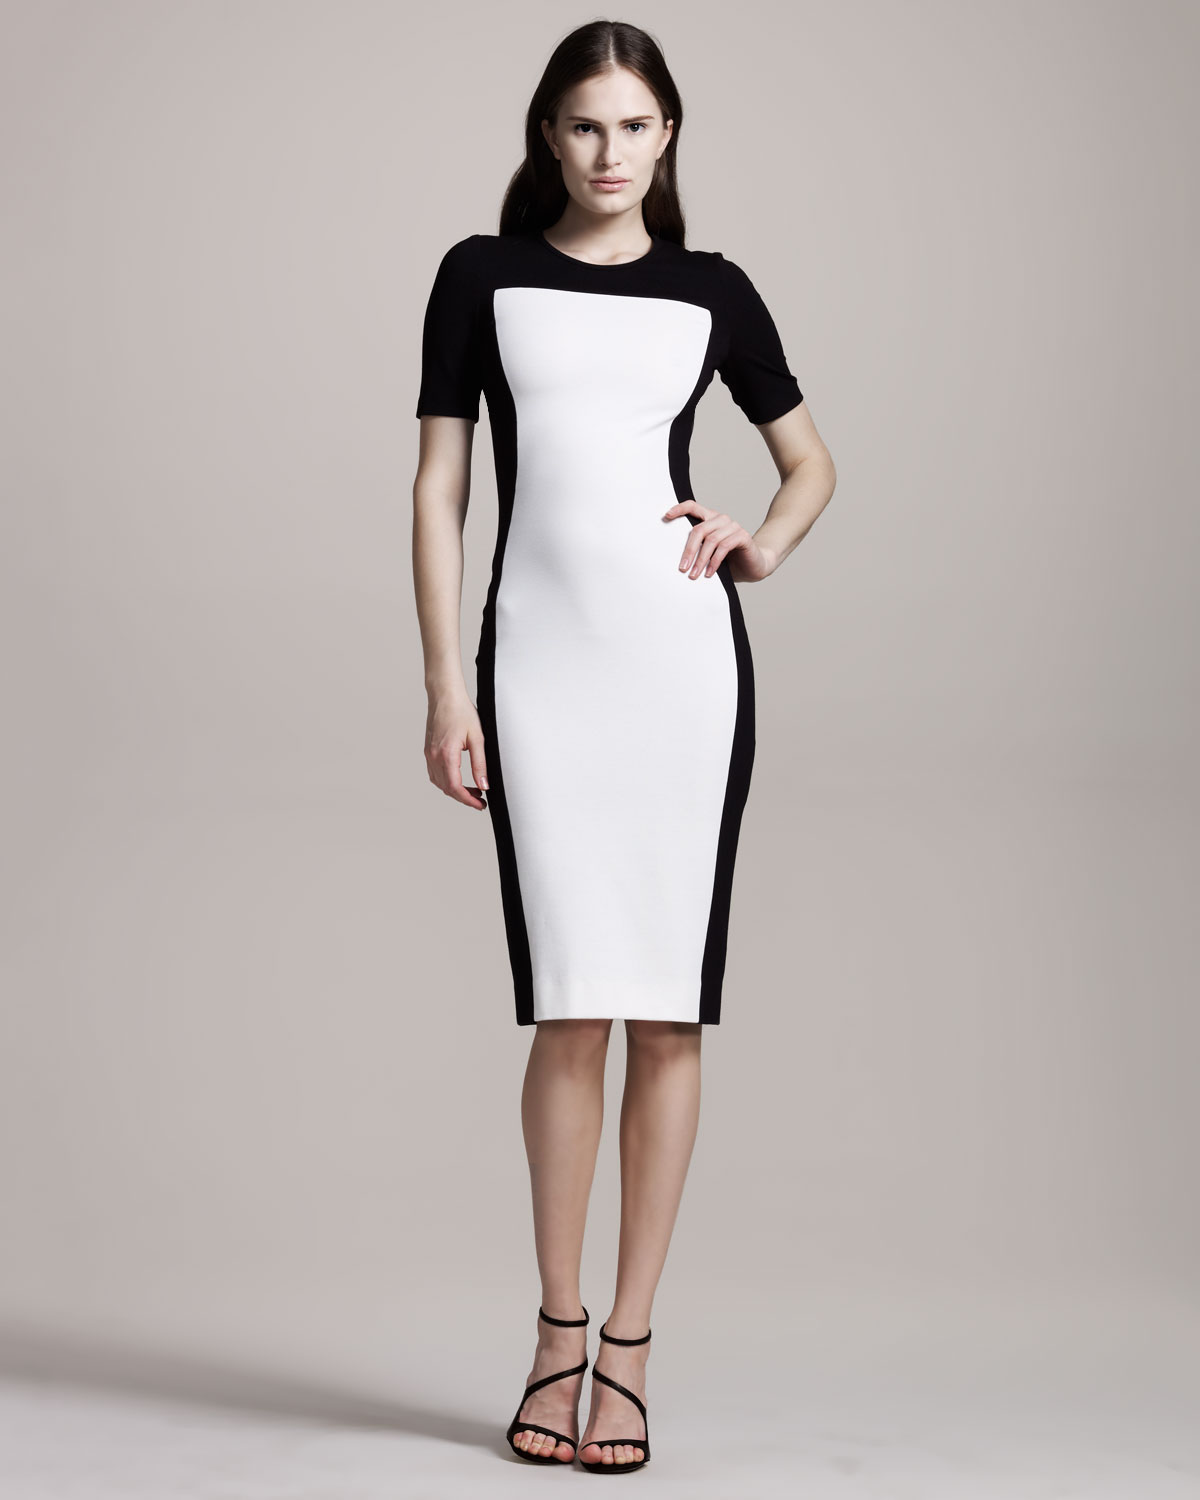 Trend to try: Black and white colorblock - What's Haute™